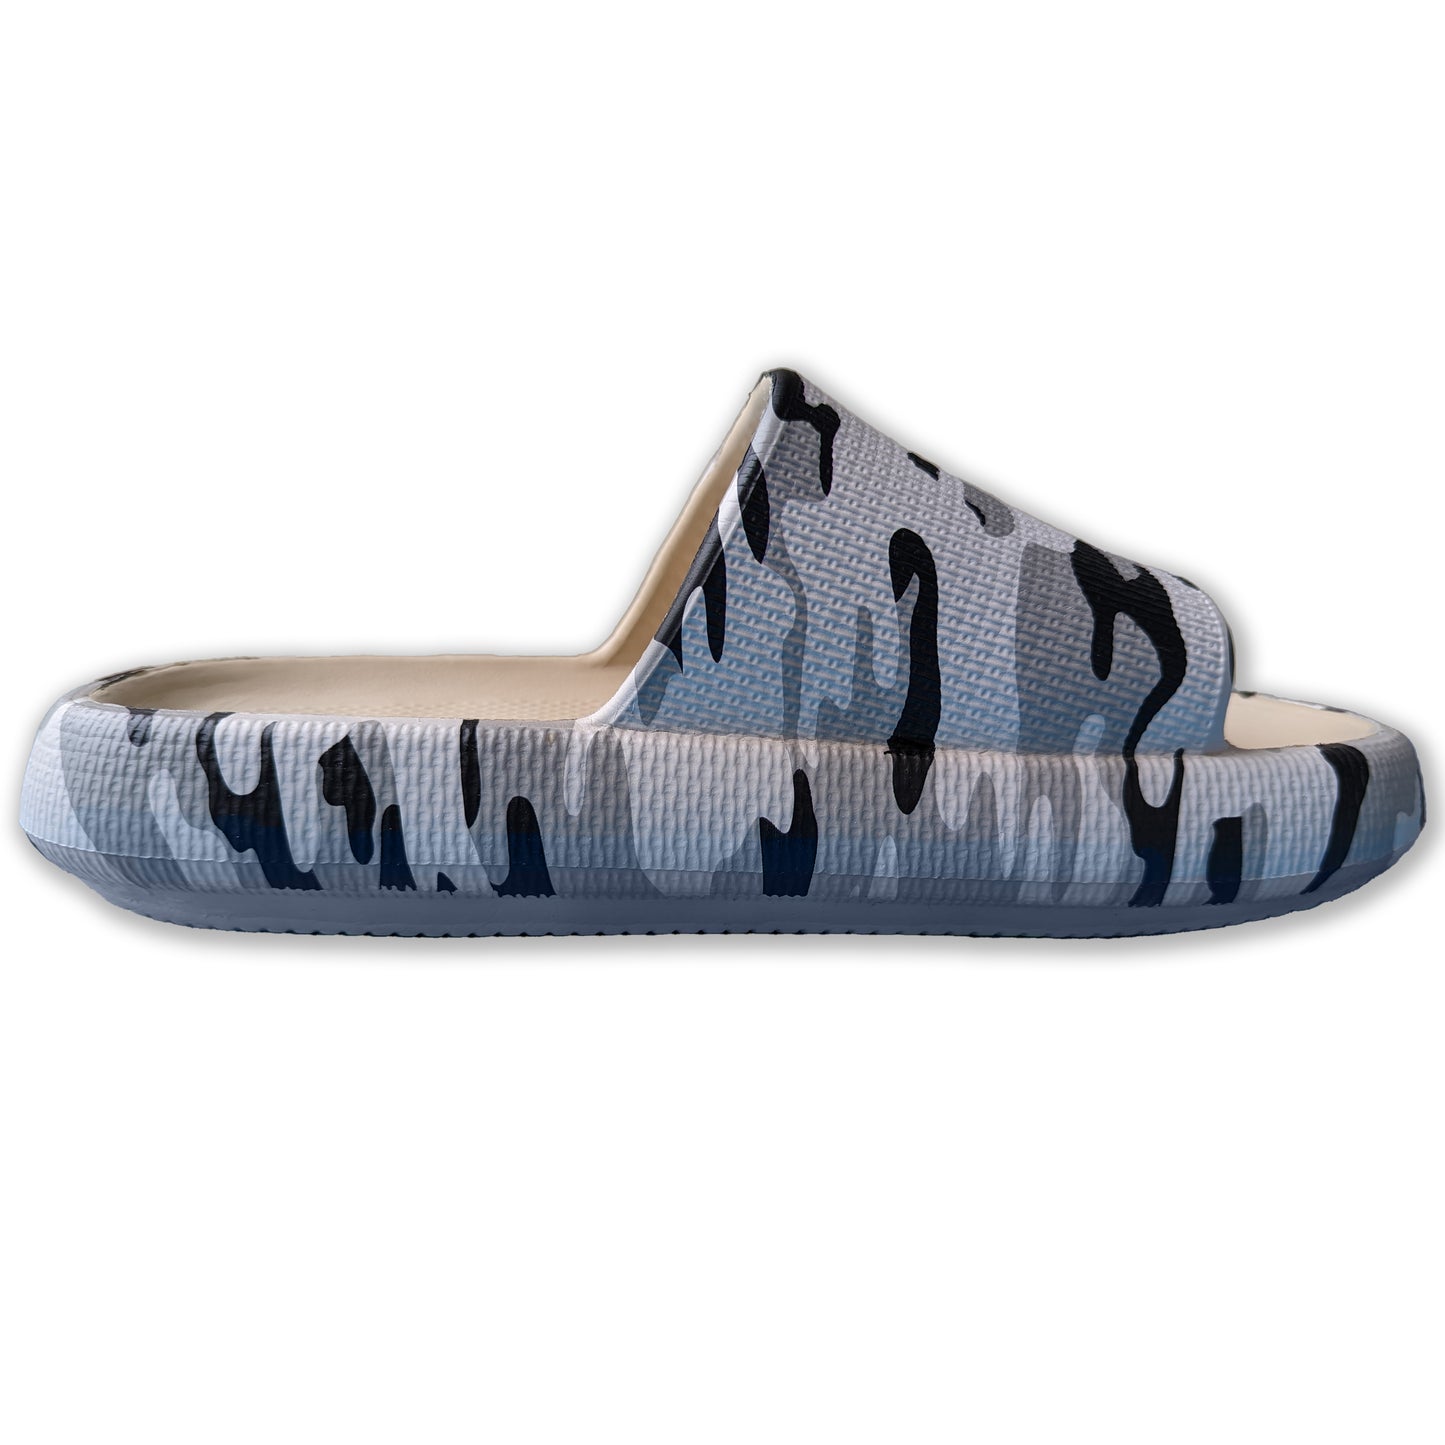 Camo Cloud Slippers for Women and Men